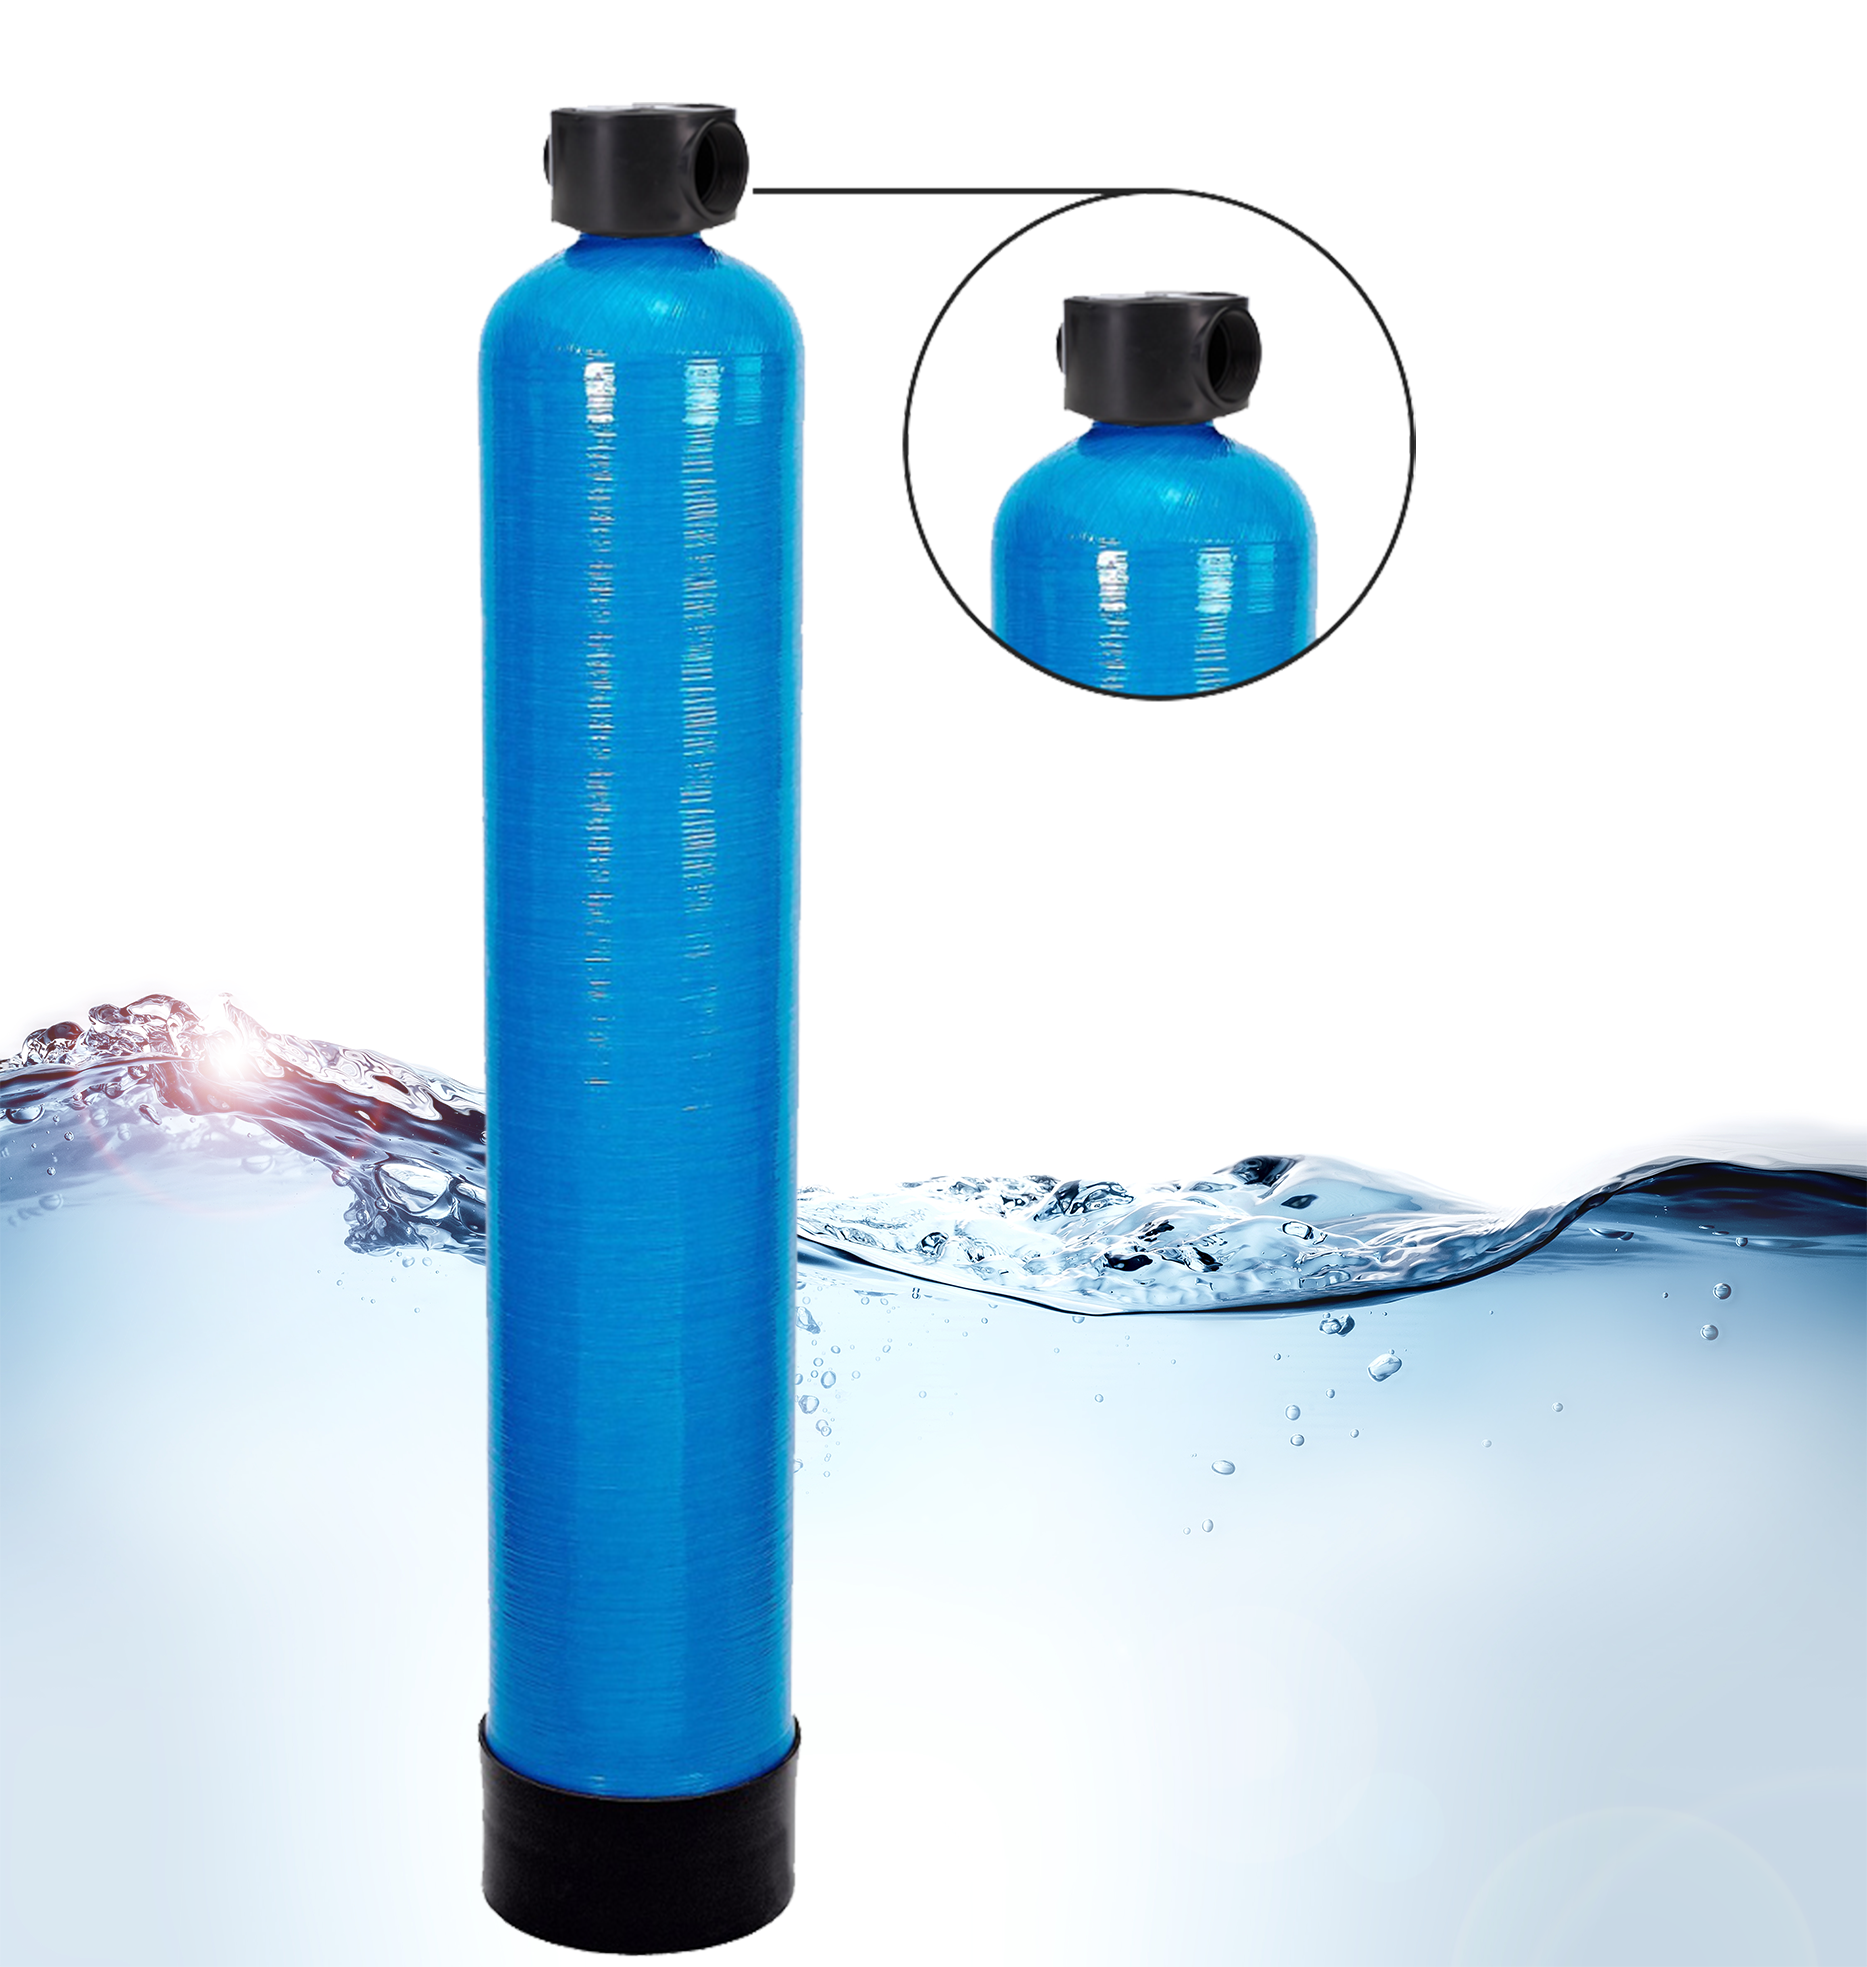 Water Ionizers UltraWater Filtration